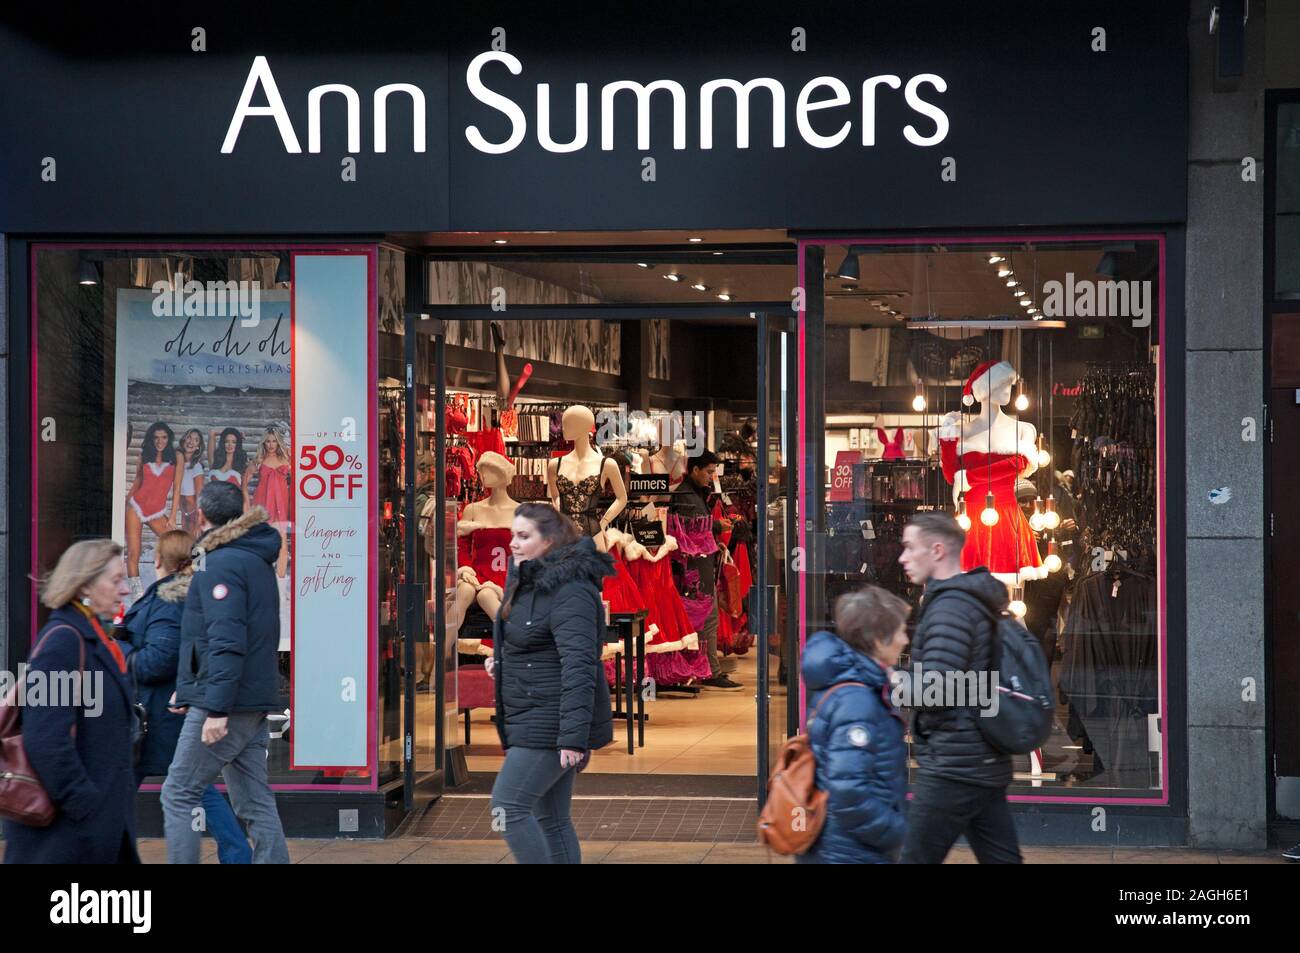 Ann Summers Uk High Resolution Stock Photography and Images - Alamy